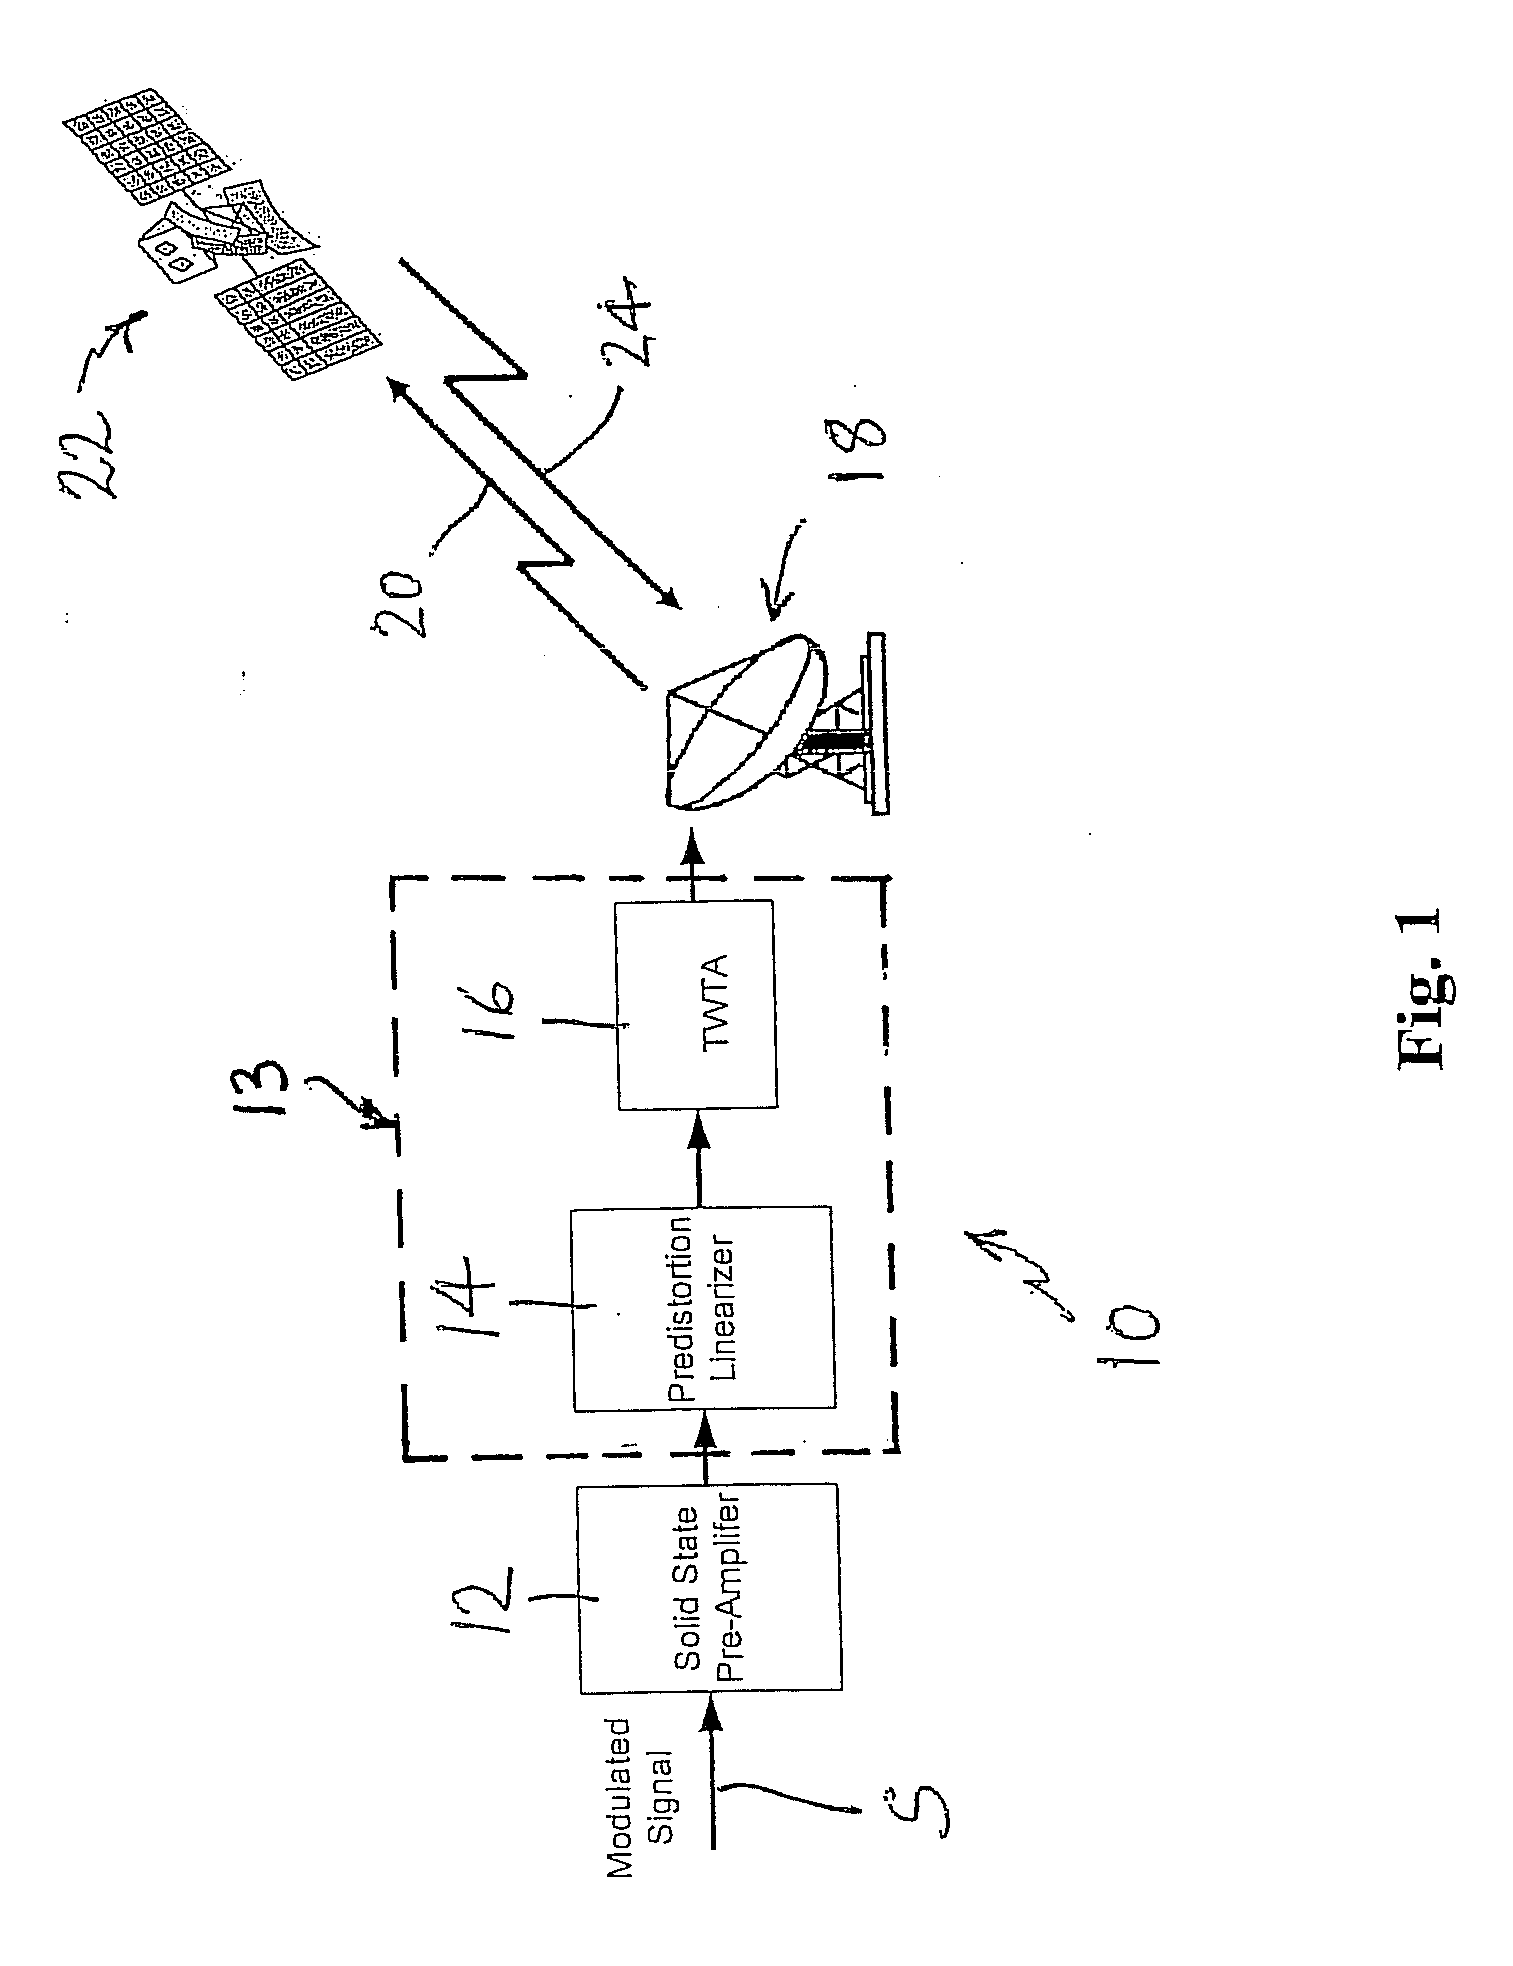 Method of transmitting higher power from a satellite by more efficiently using the existing satellite power amplifiers